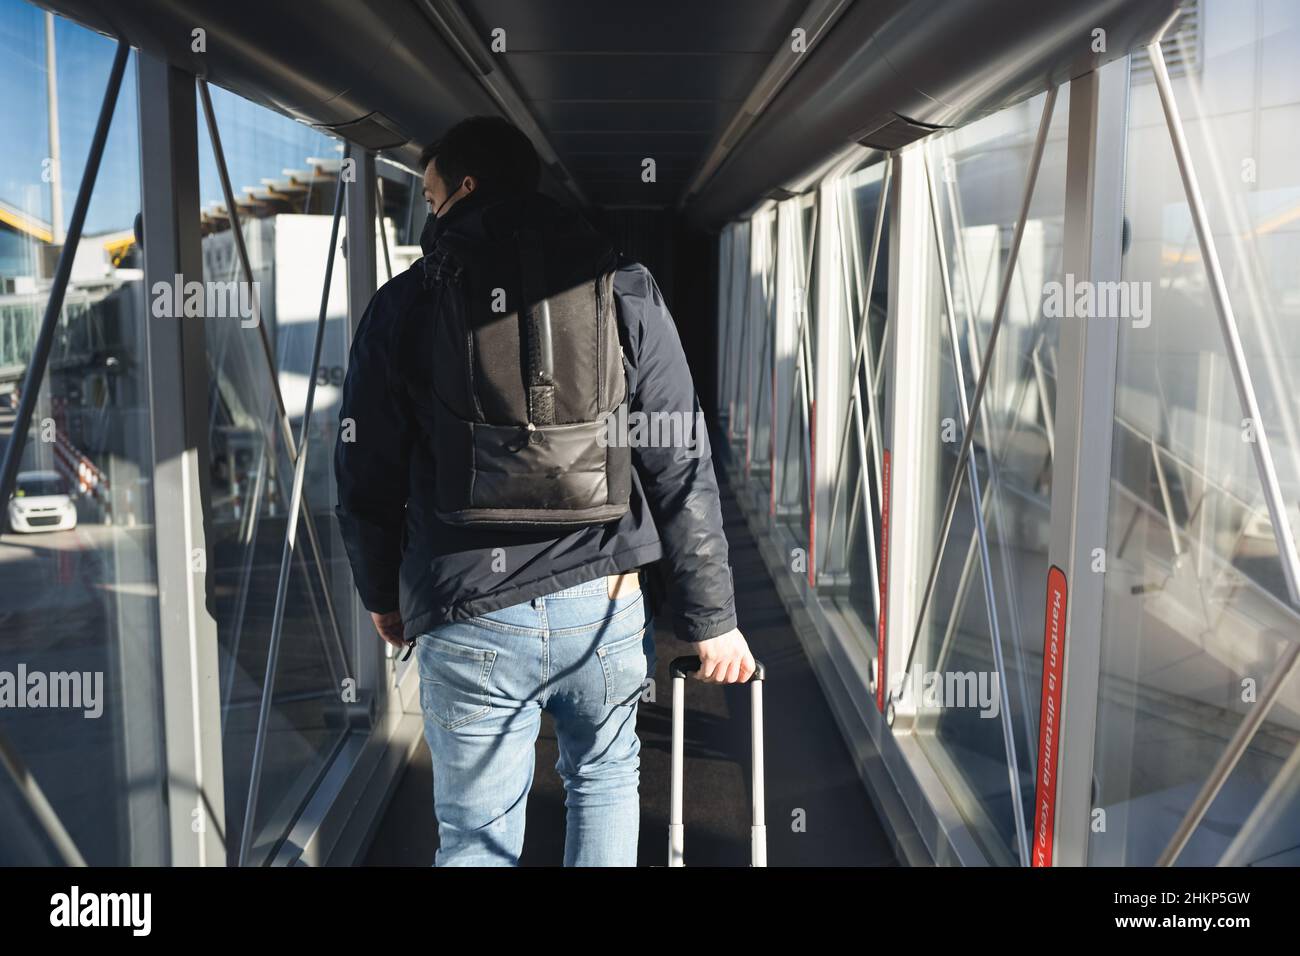 Passenger entering the airport with their bags Stock Photo